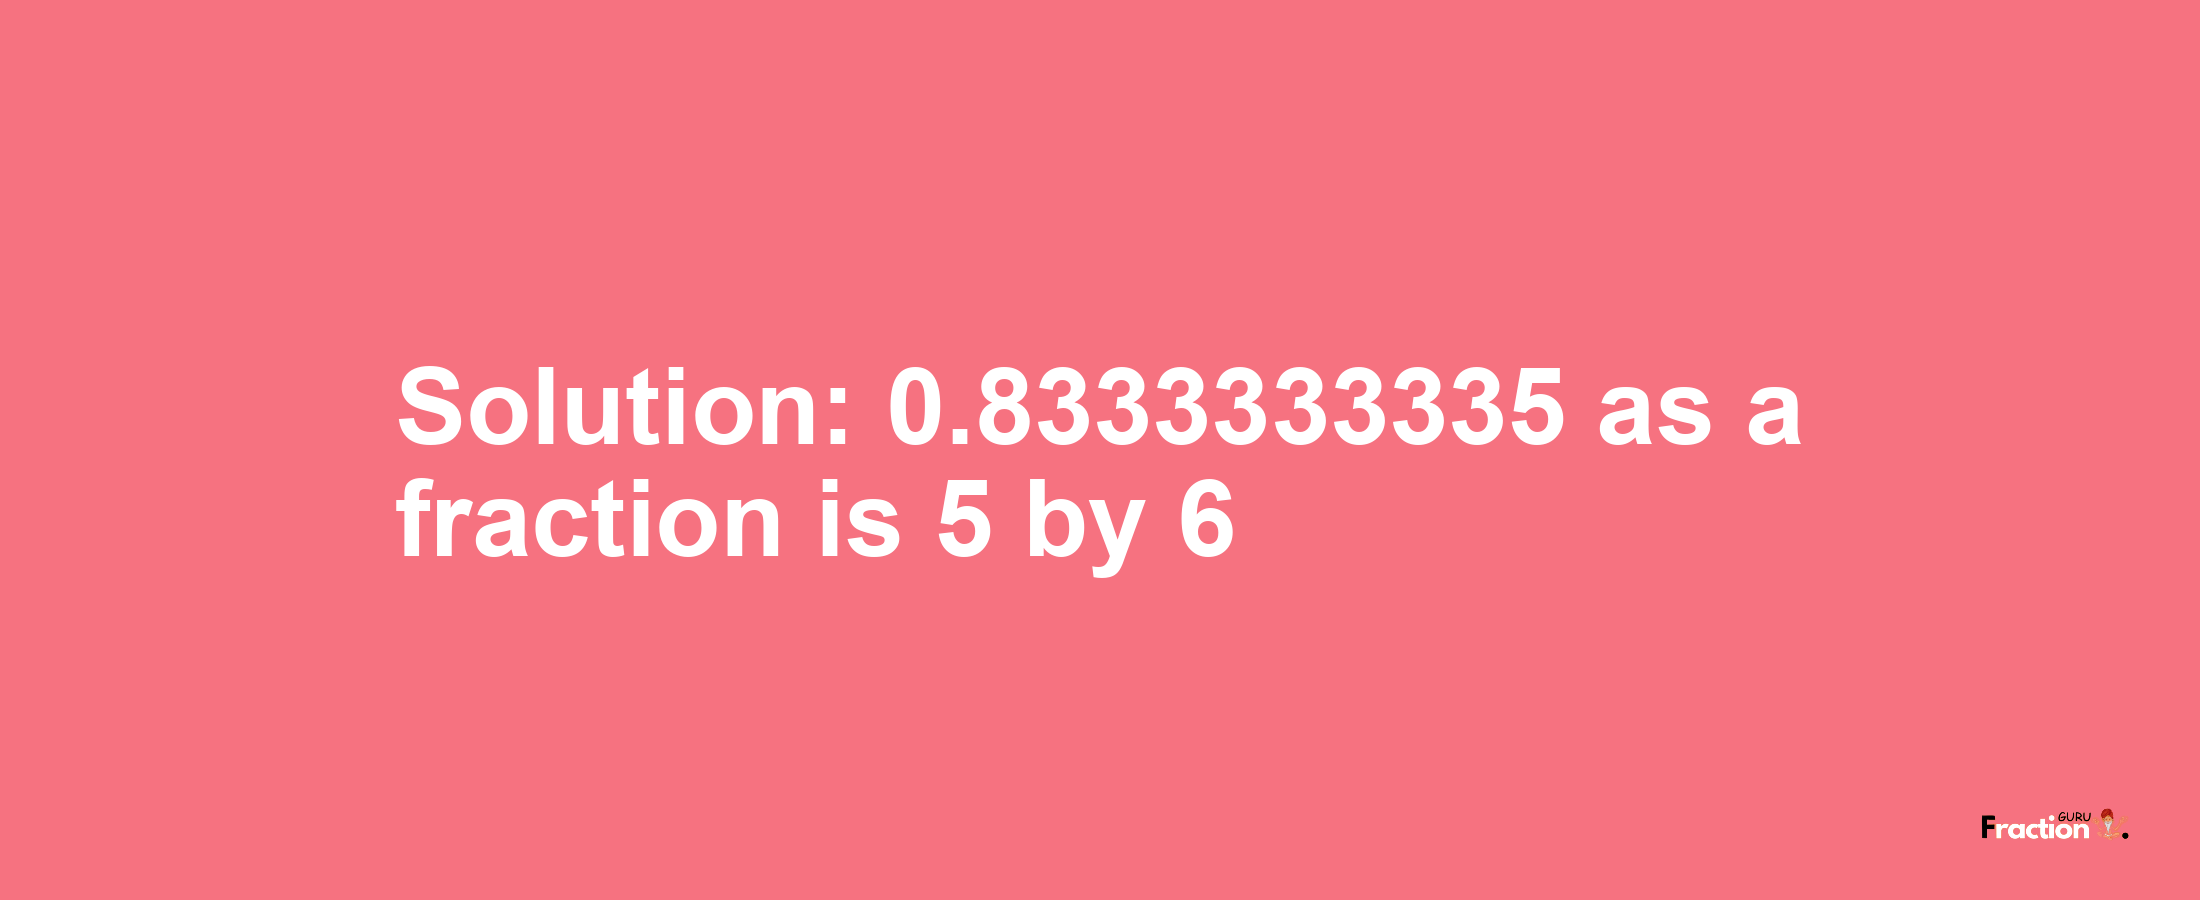 Solution:0.8333333335 as a fraction is 5/6